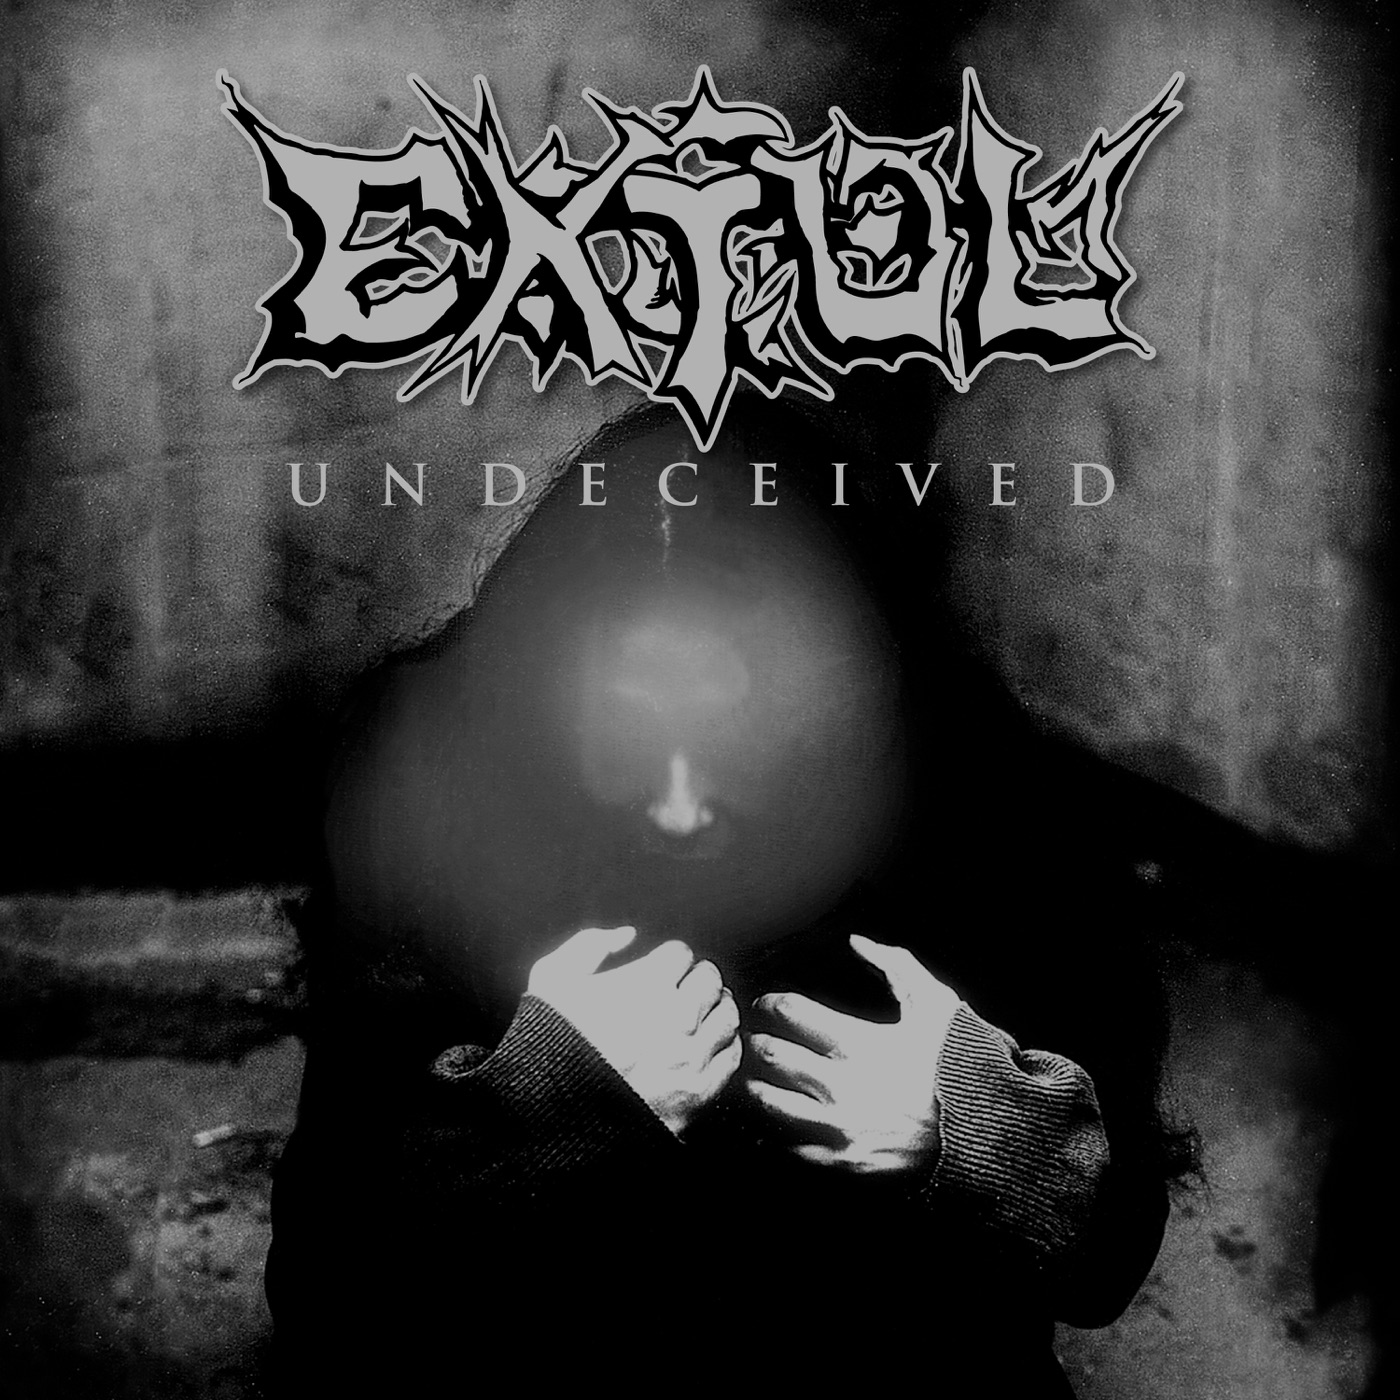 Undeceived by Extol